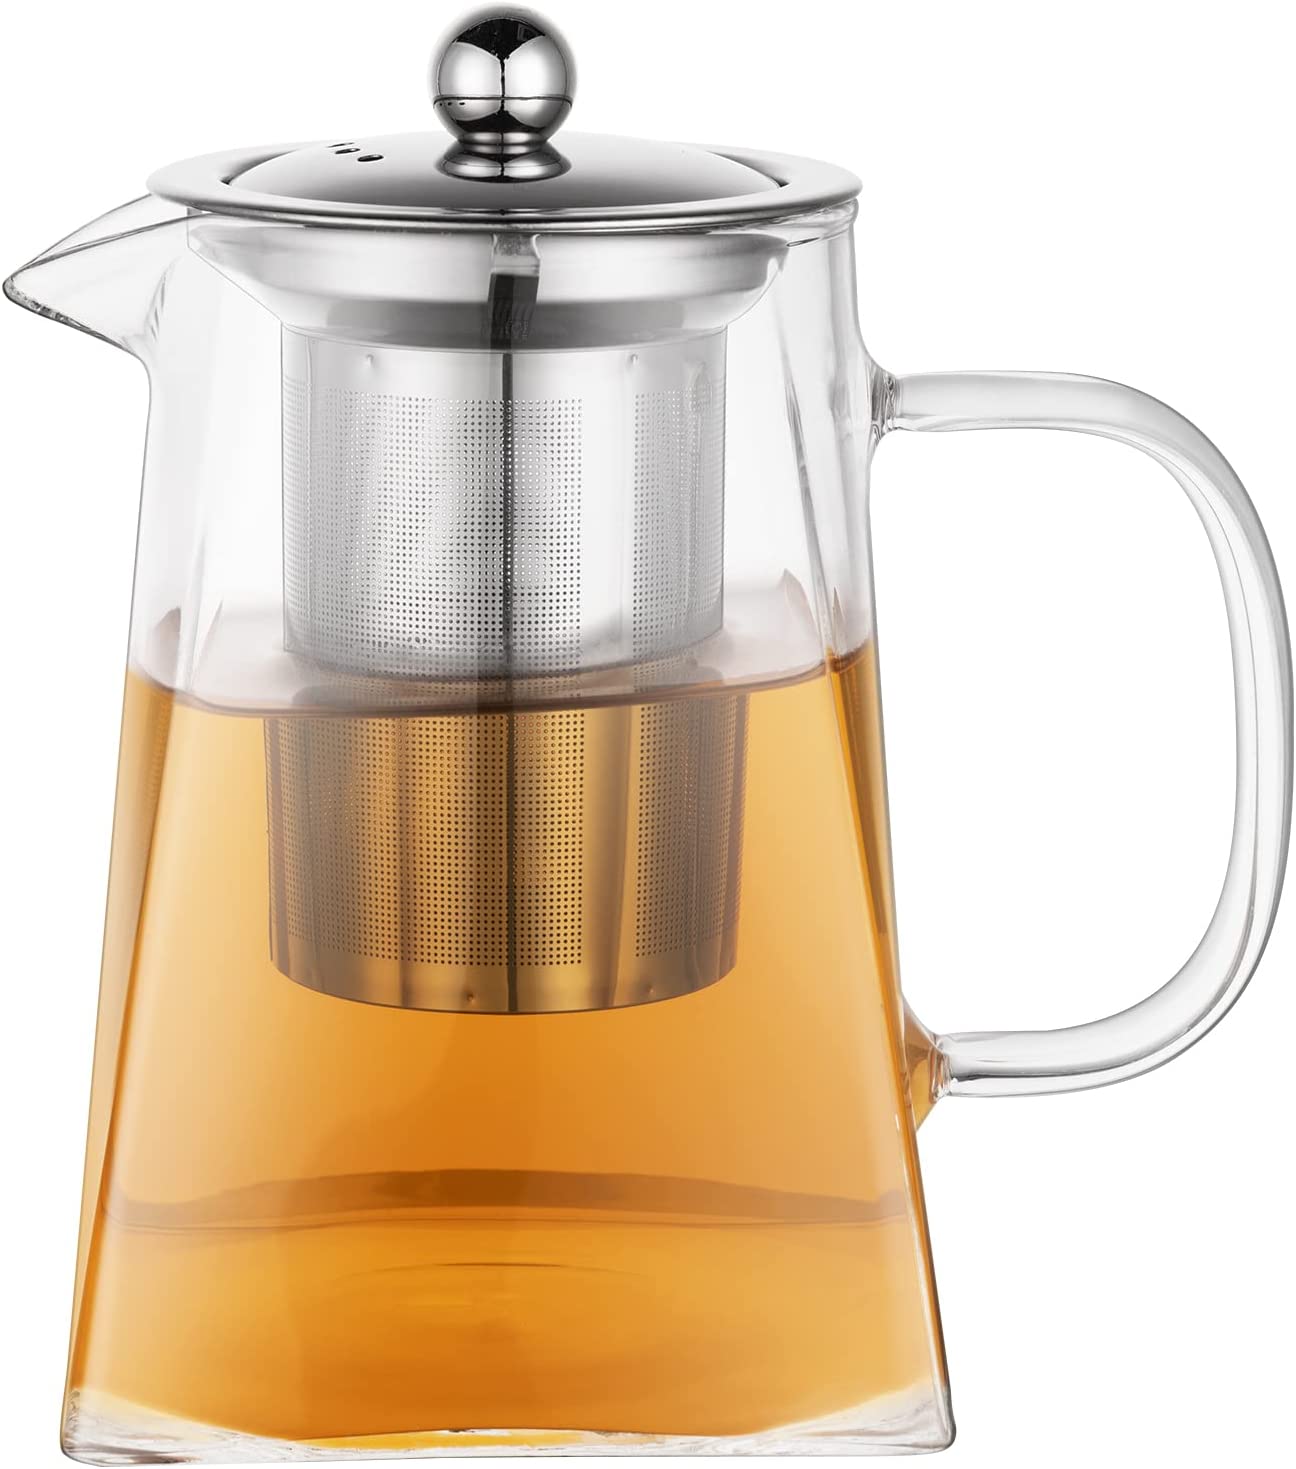 Wisolt Glass Teapots with Removable Infuser, Tall Borosilicate Glass Teapot for Loose Leaves, Square Shape, Stainless Steel Sieve & Stainless Steel Lid, transparent, 350ml